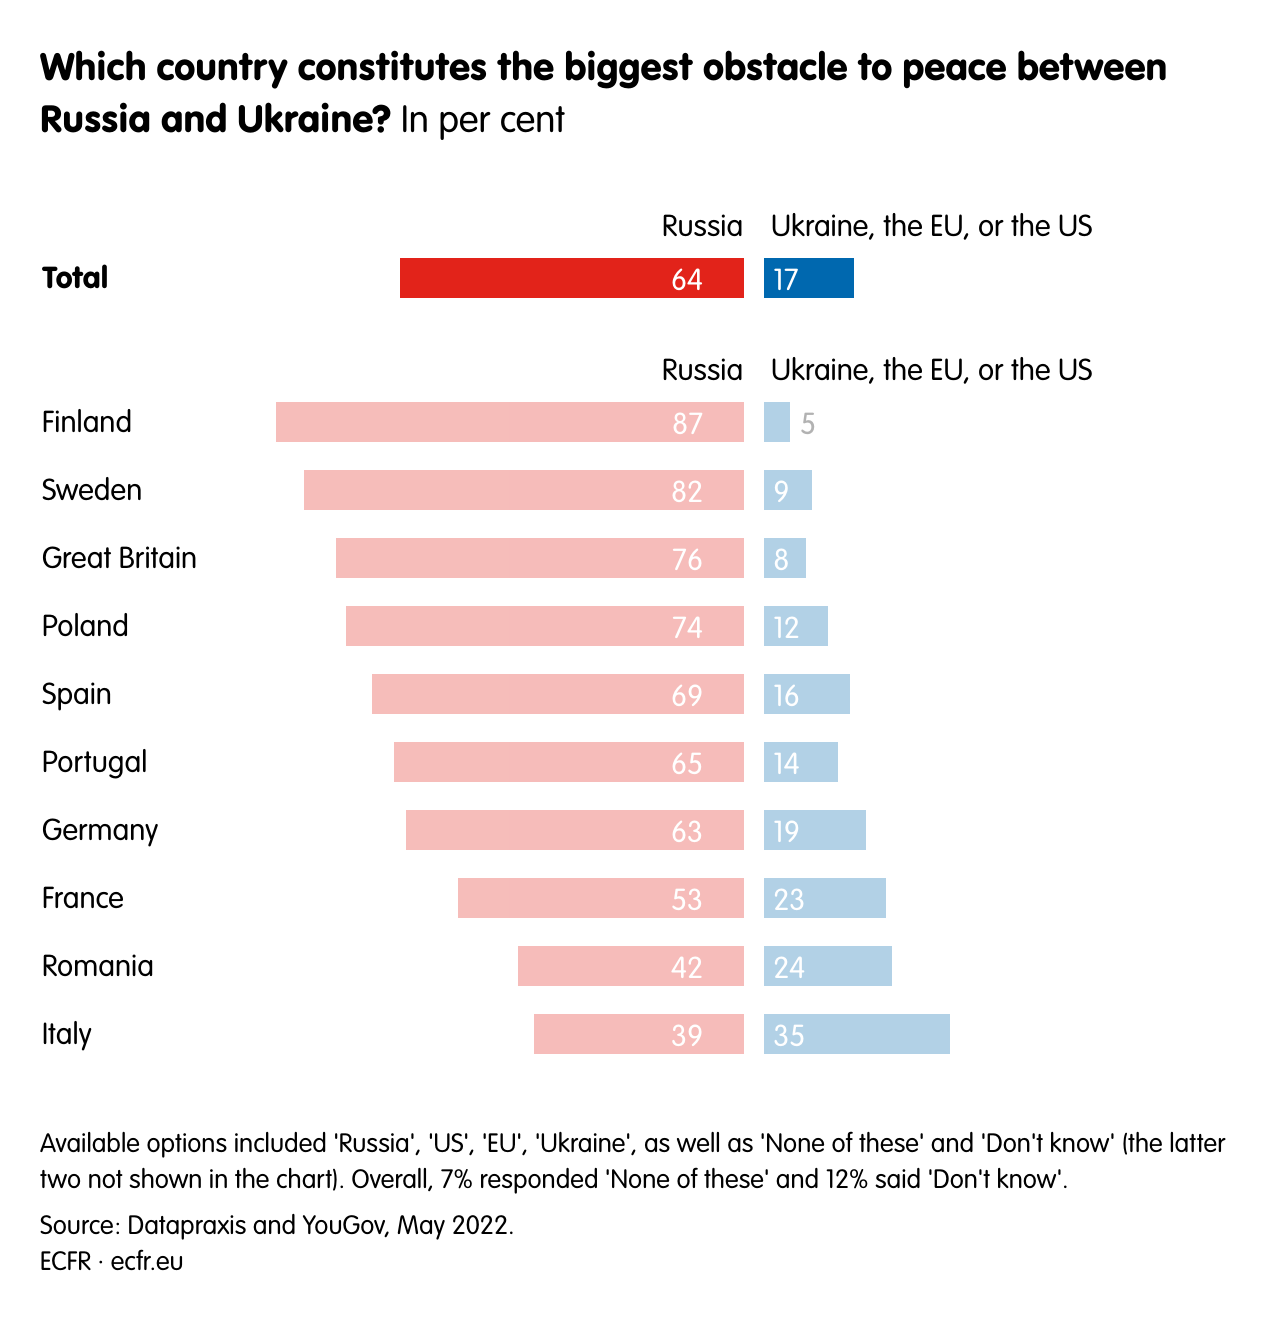 Which country constitutes the biggest obstacle to peace between Russia and Ukraine?